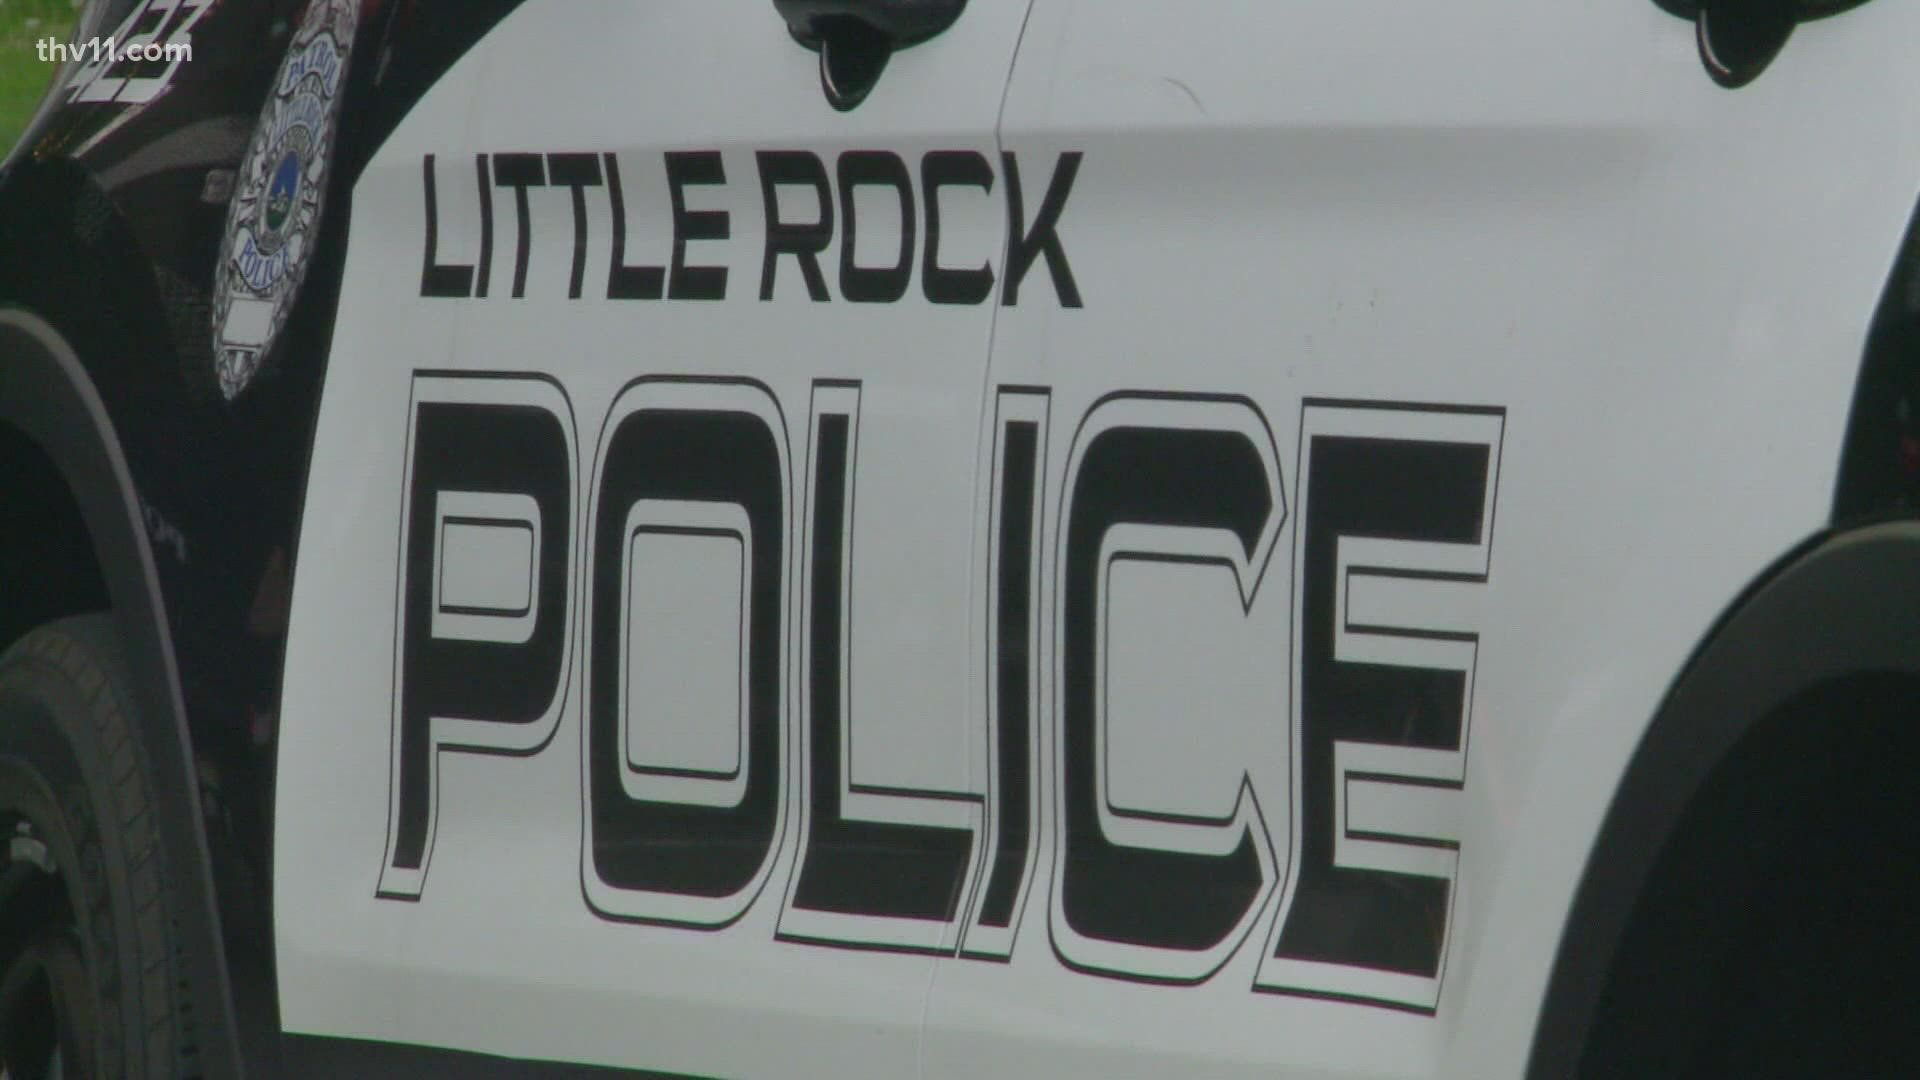 City leaders are planning action after an HR investigation into the Little Rock Police Department.